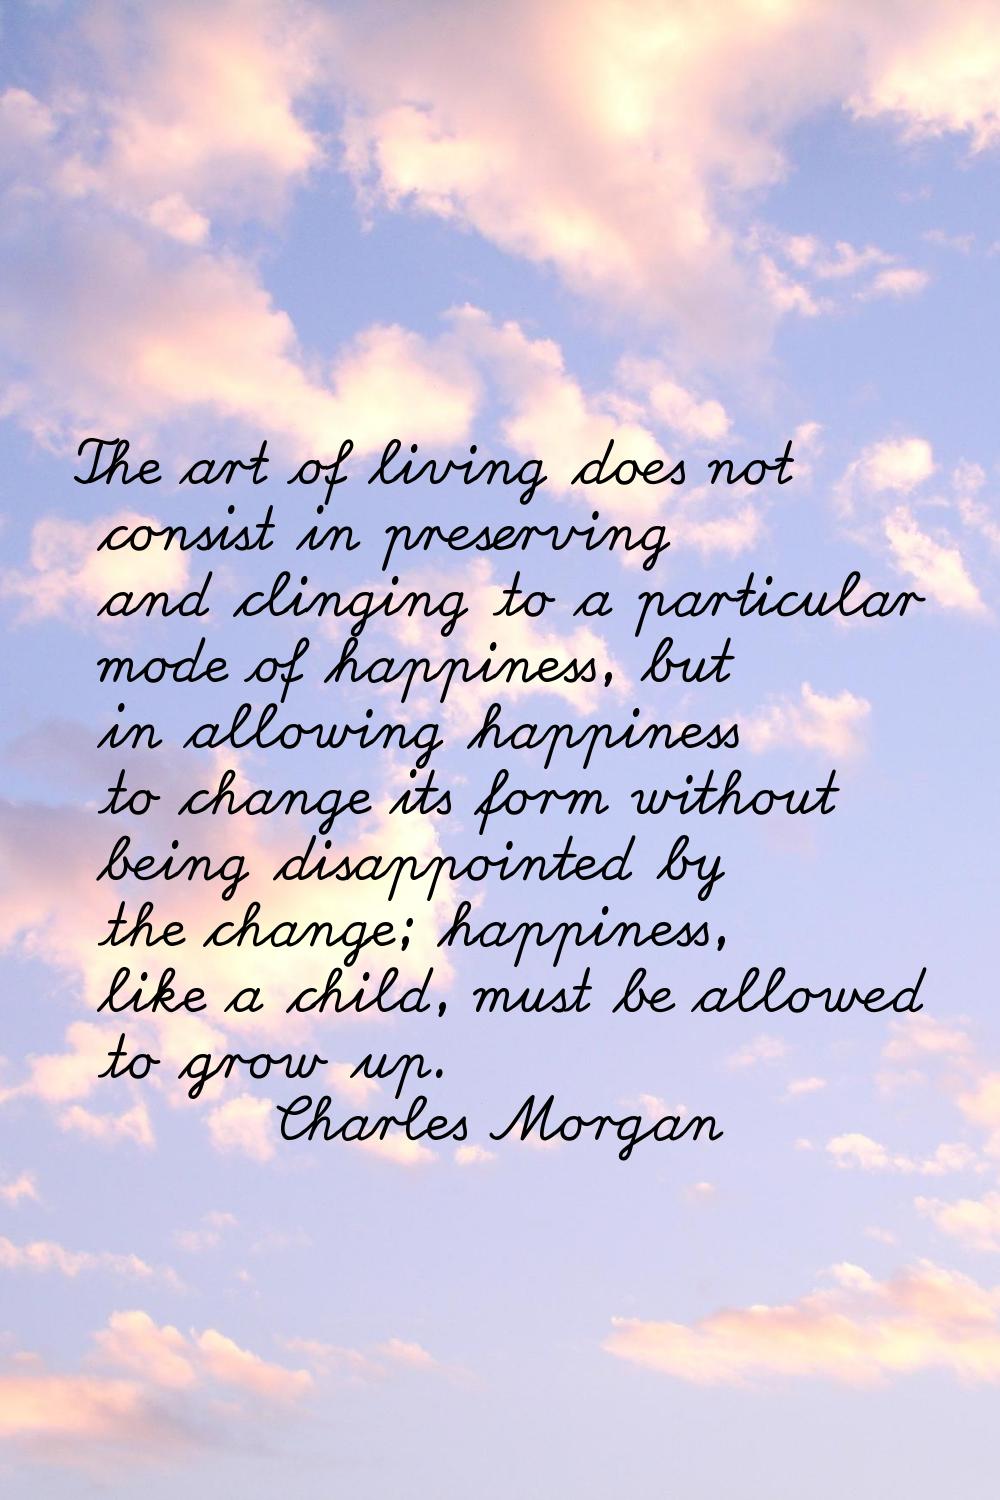 The art of living does not consist in preserving and clinging to a particular mode of happiness, bu